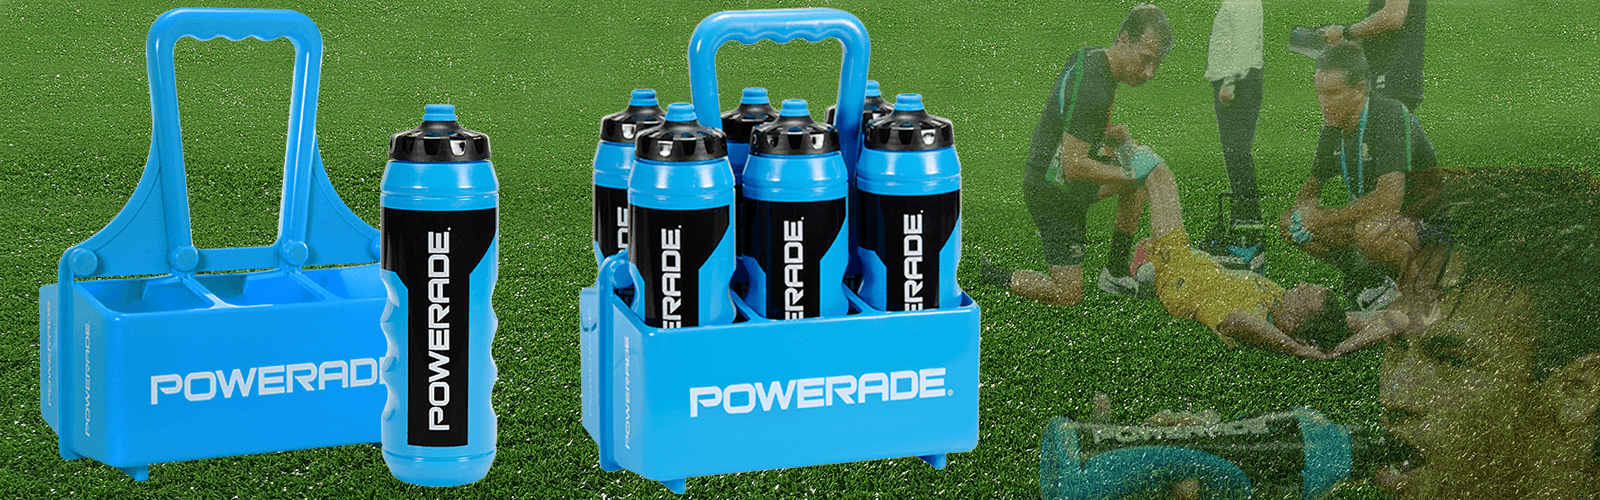 https://teamsafegear.com/wp-content/uploads/2018/06/Powerade-Page-Banner-new.png